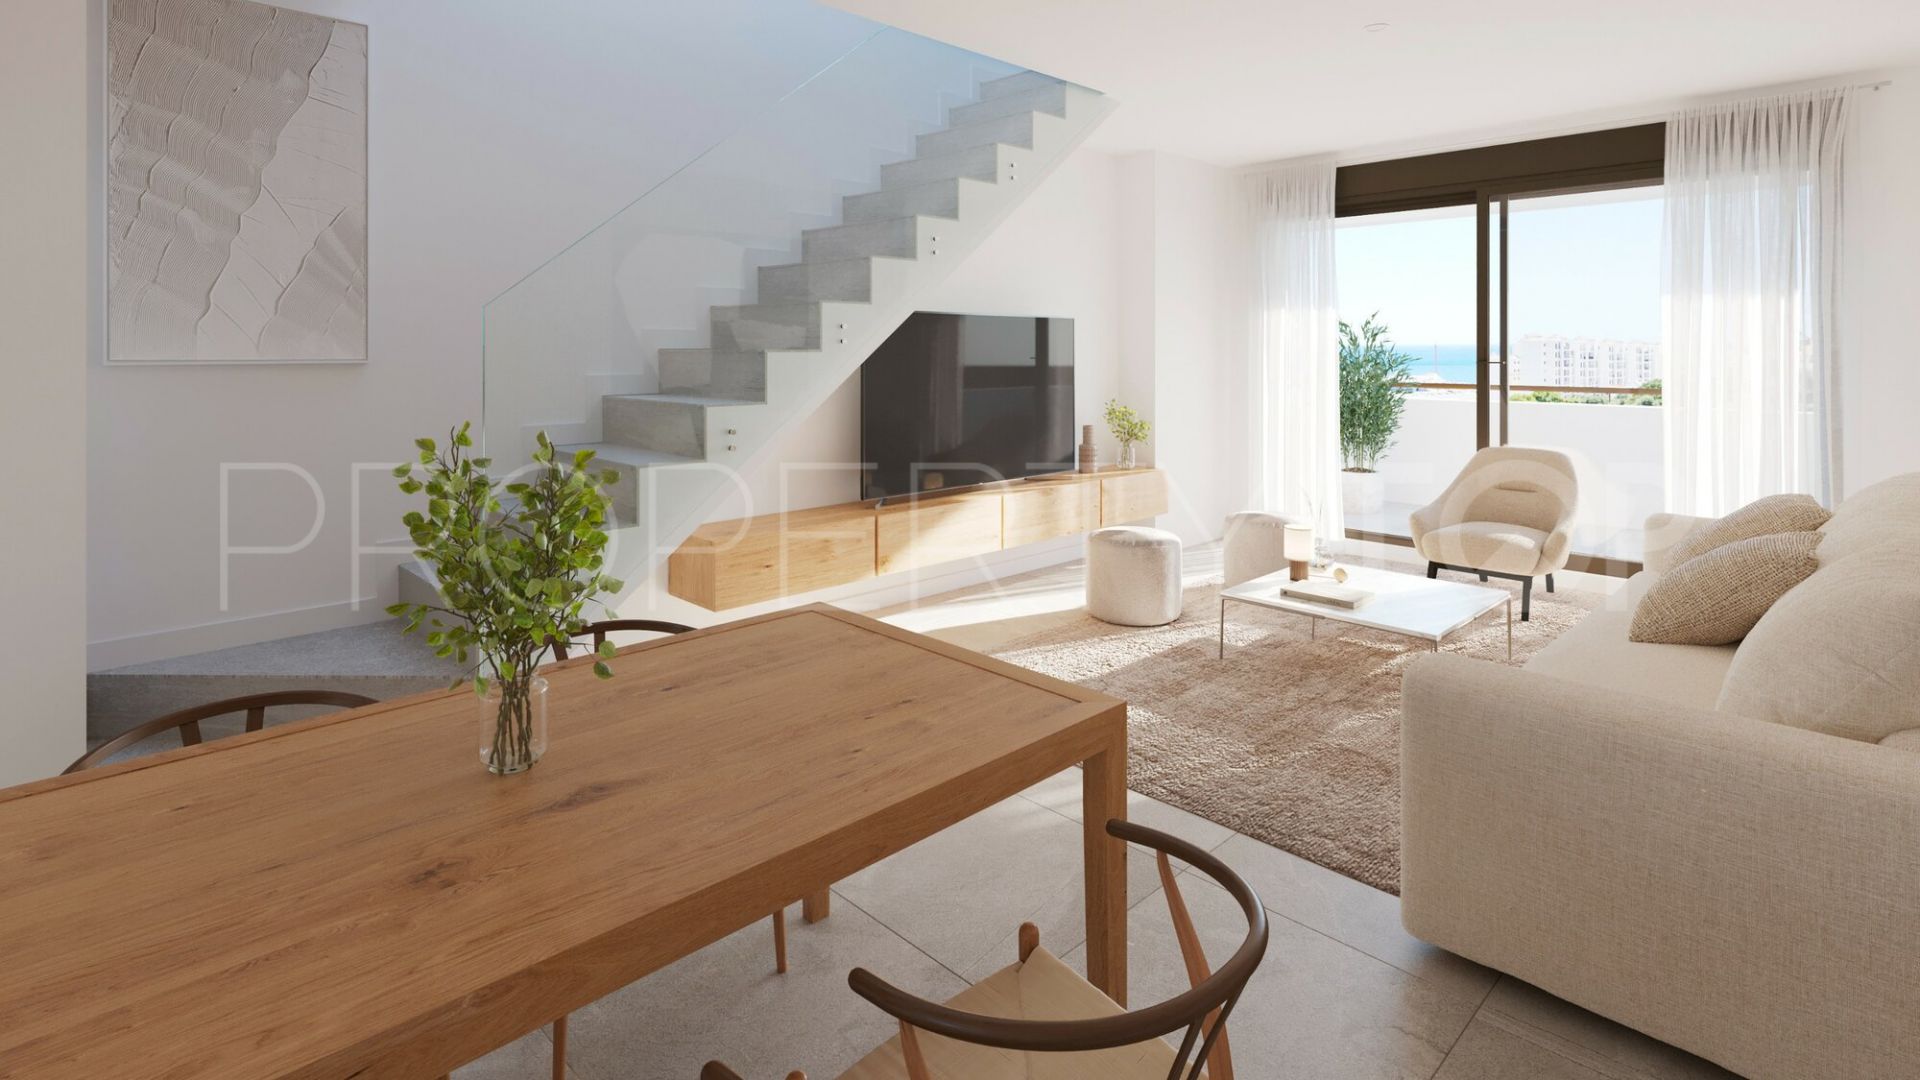 For sale Estepona ground floor apartment with 4 bedrooms